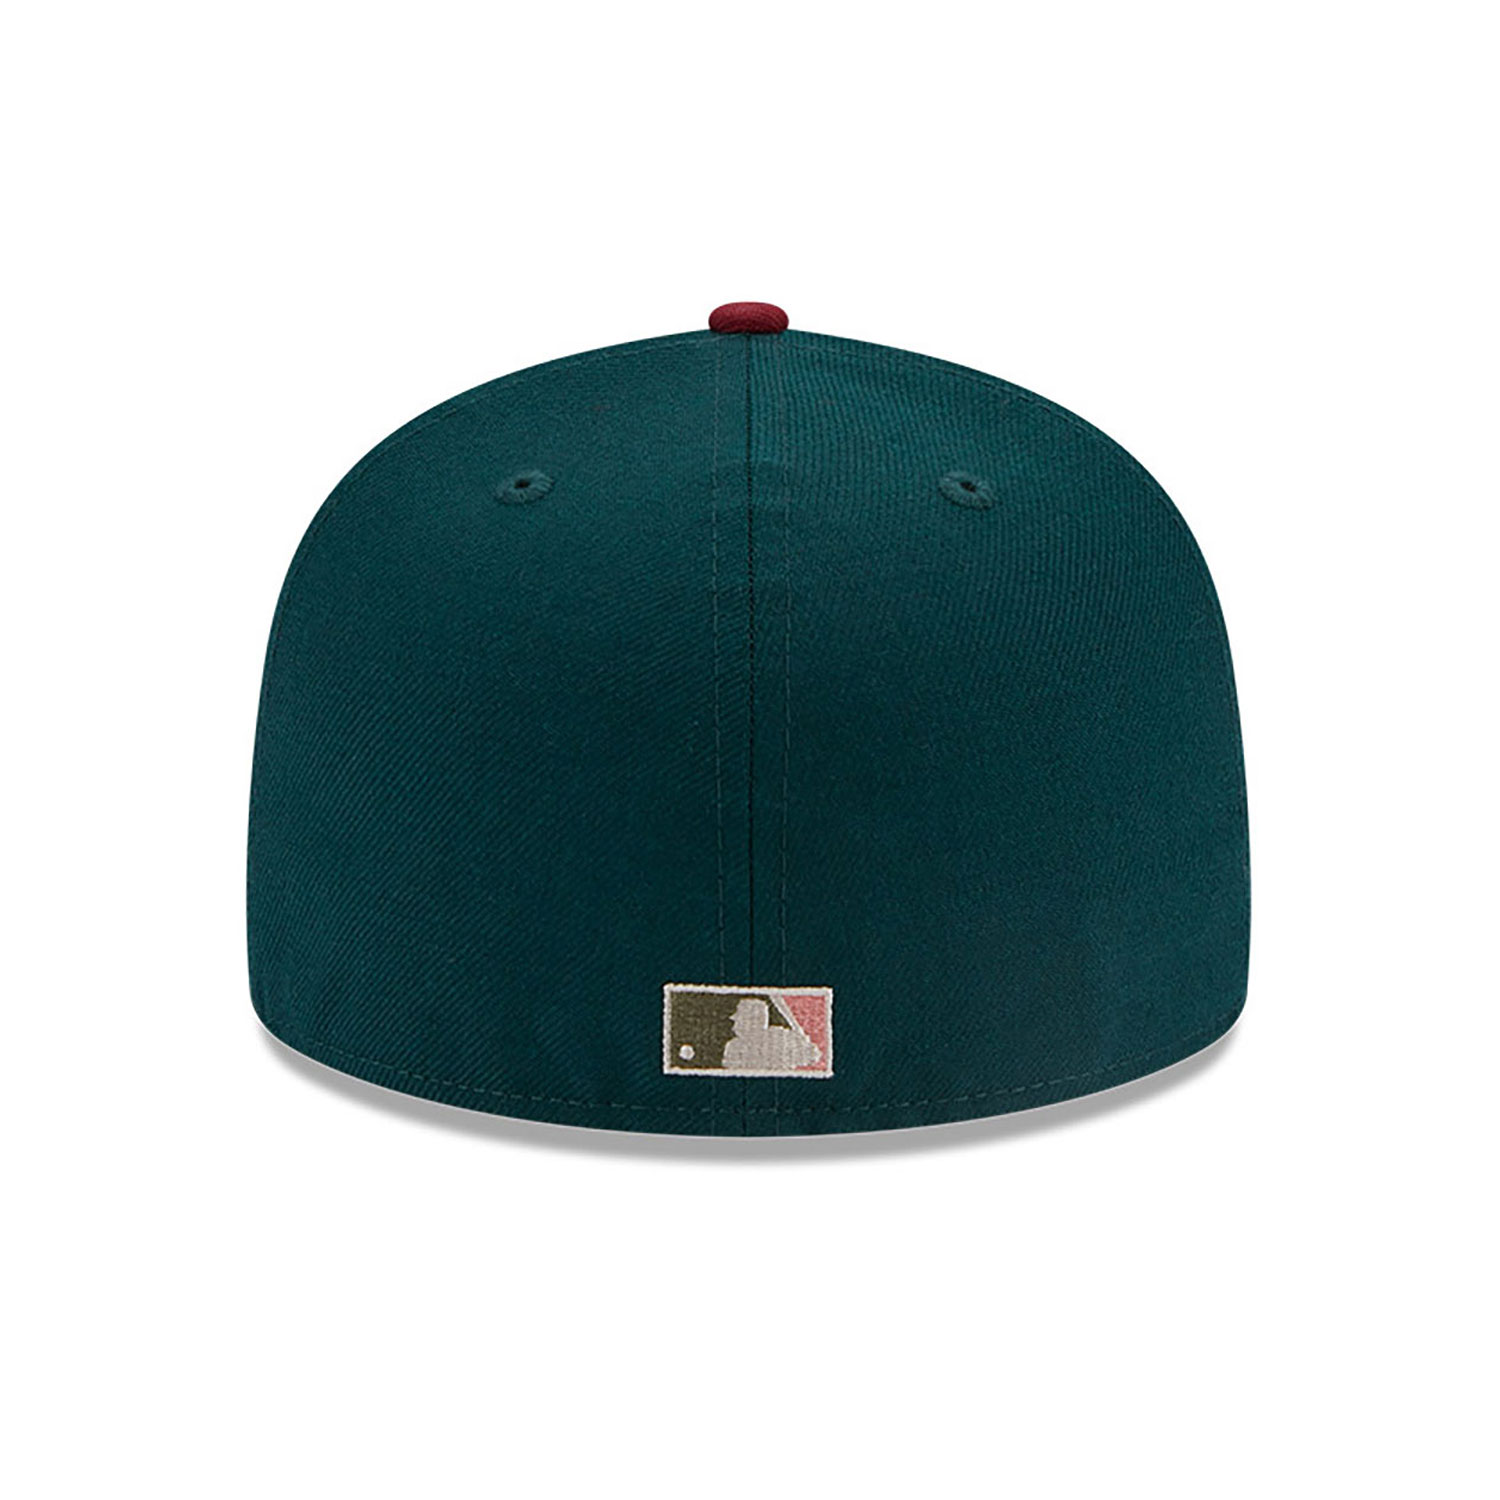 New York Yankees MLB Contrast World Series Dark Green 59FIFTY Fitted Cap